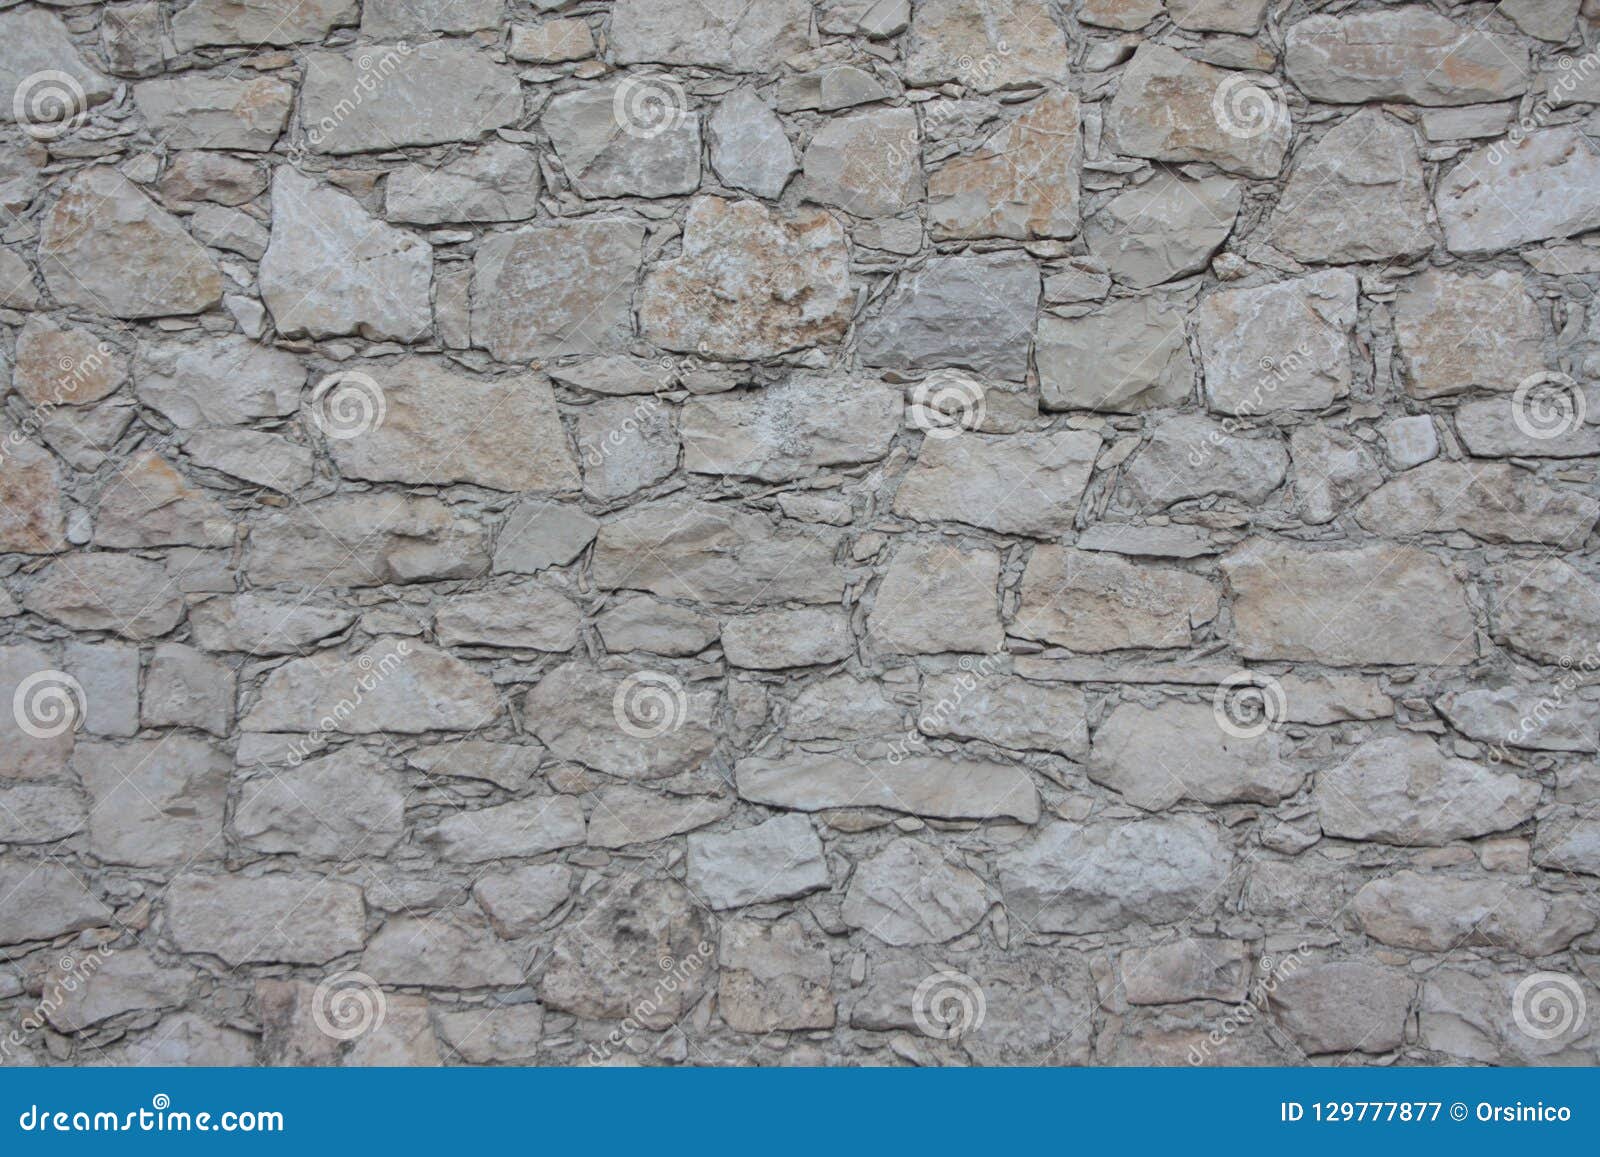 stone wall texture background seamless in rustic style